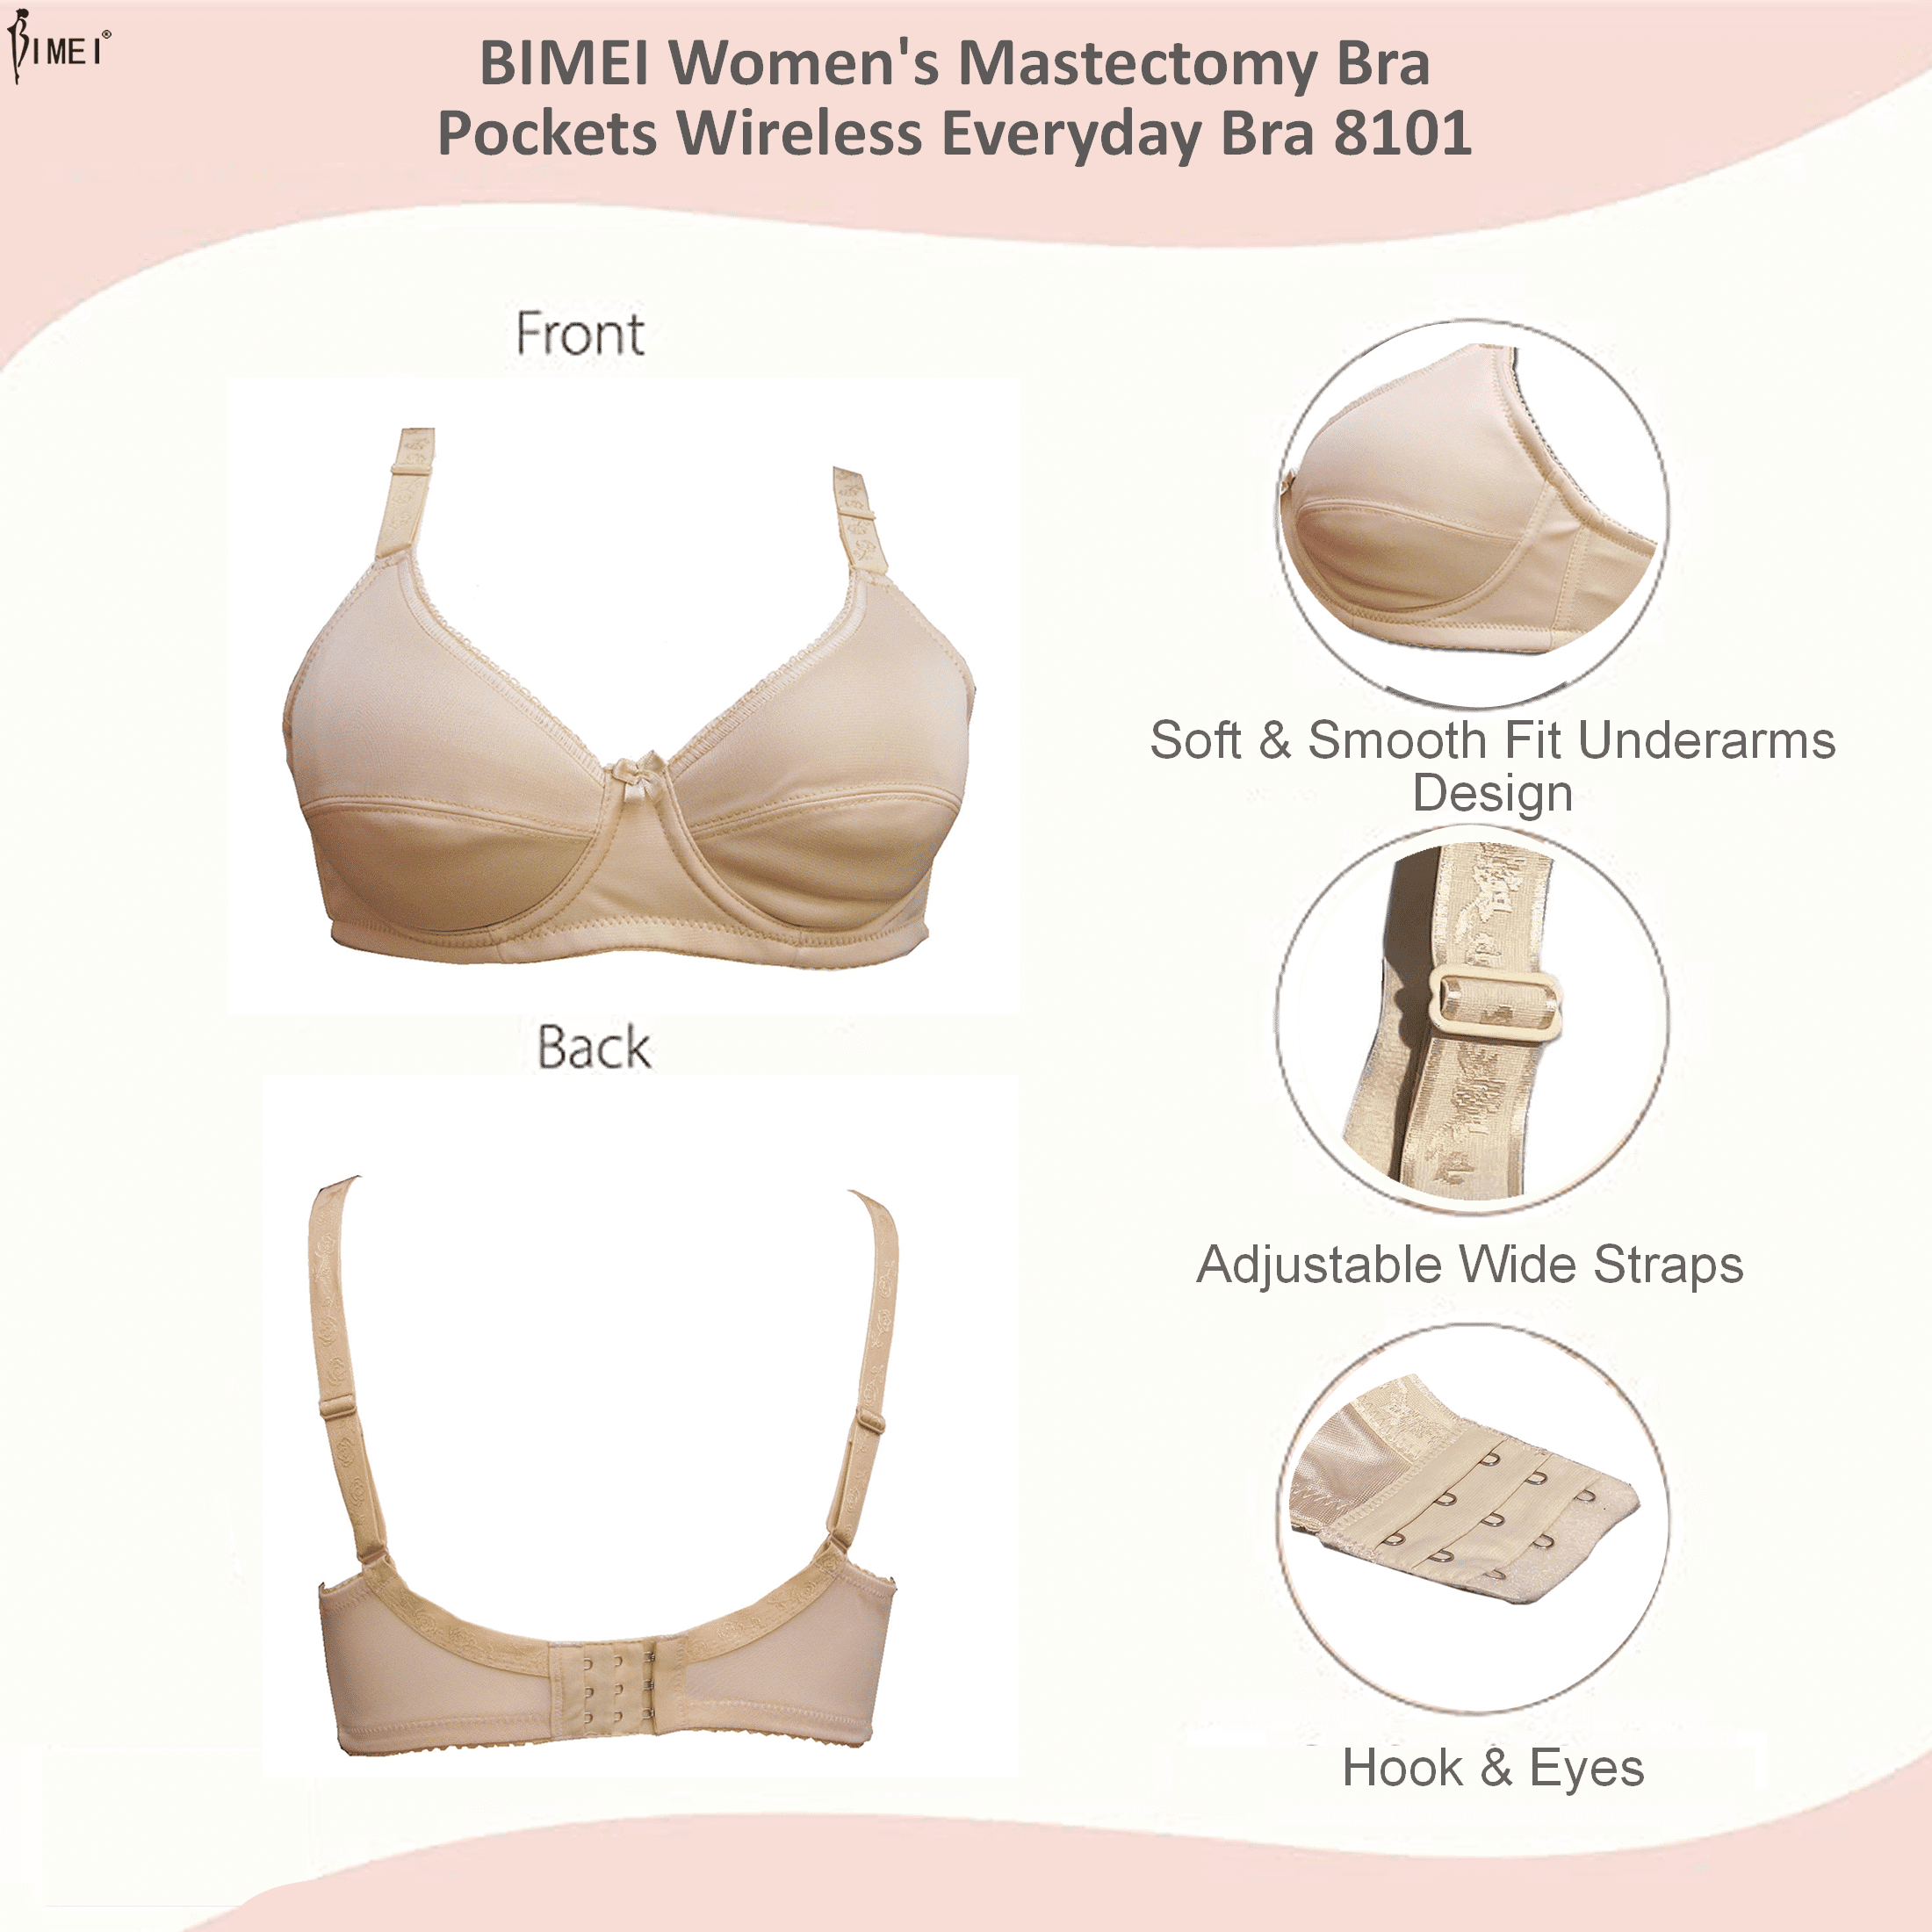 BIMEI Women's Mastectomy Bra with Pockets for Breast Prosthesis Wire Free  Pocketed Everyday Bra for Everyday Bra 0138,Beige,36C